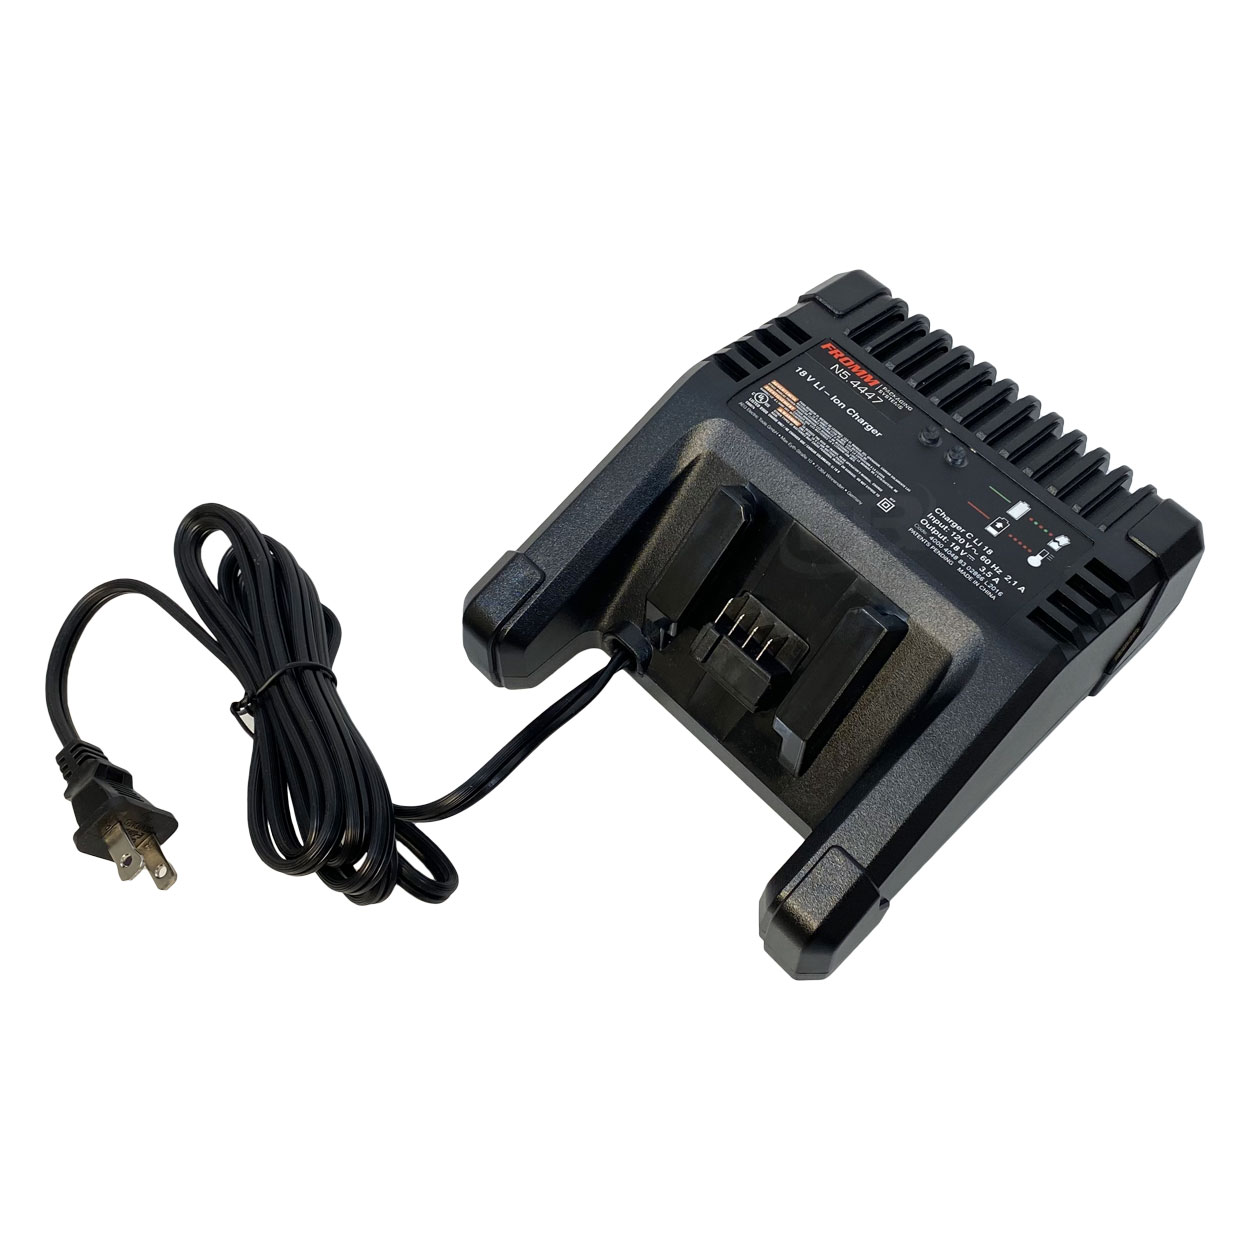 Charger for Warrior 18V drill battery - tools - by owner - sale - craigslist